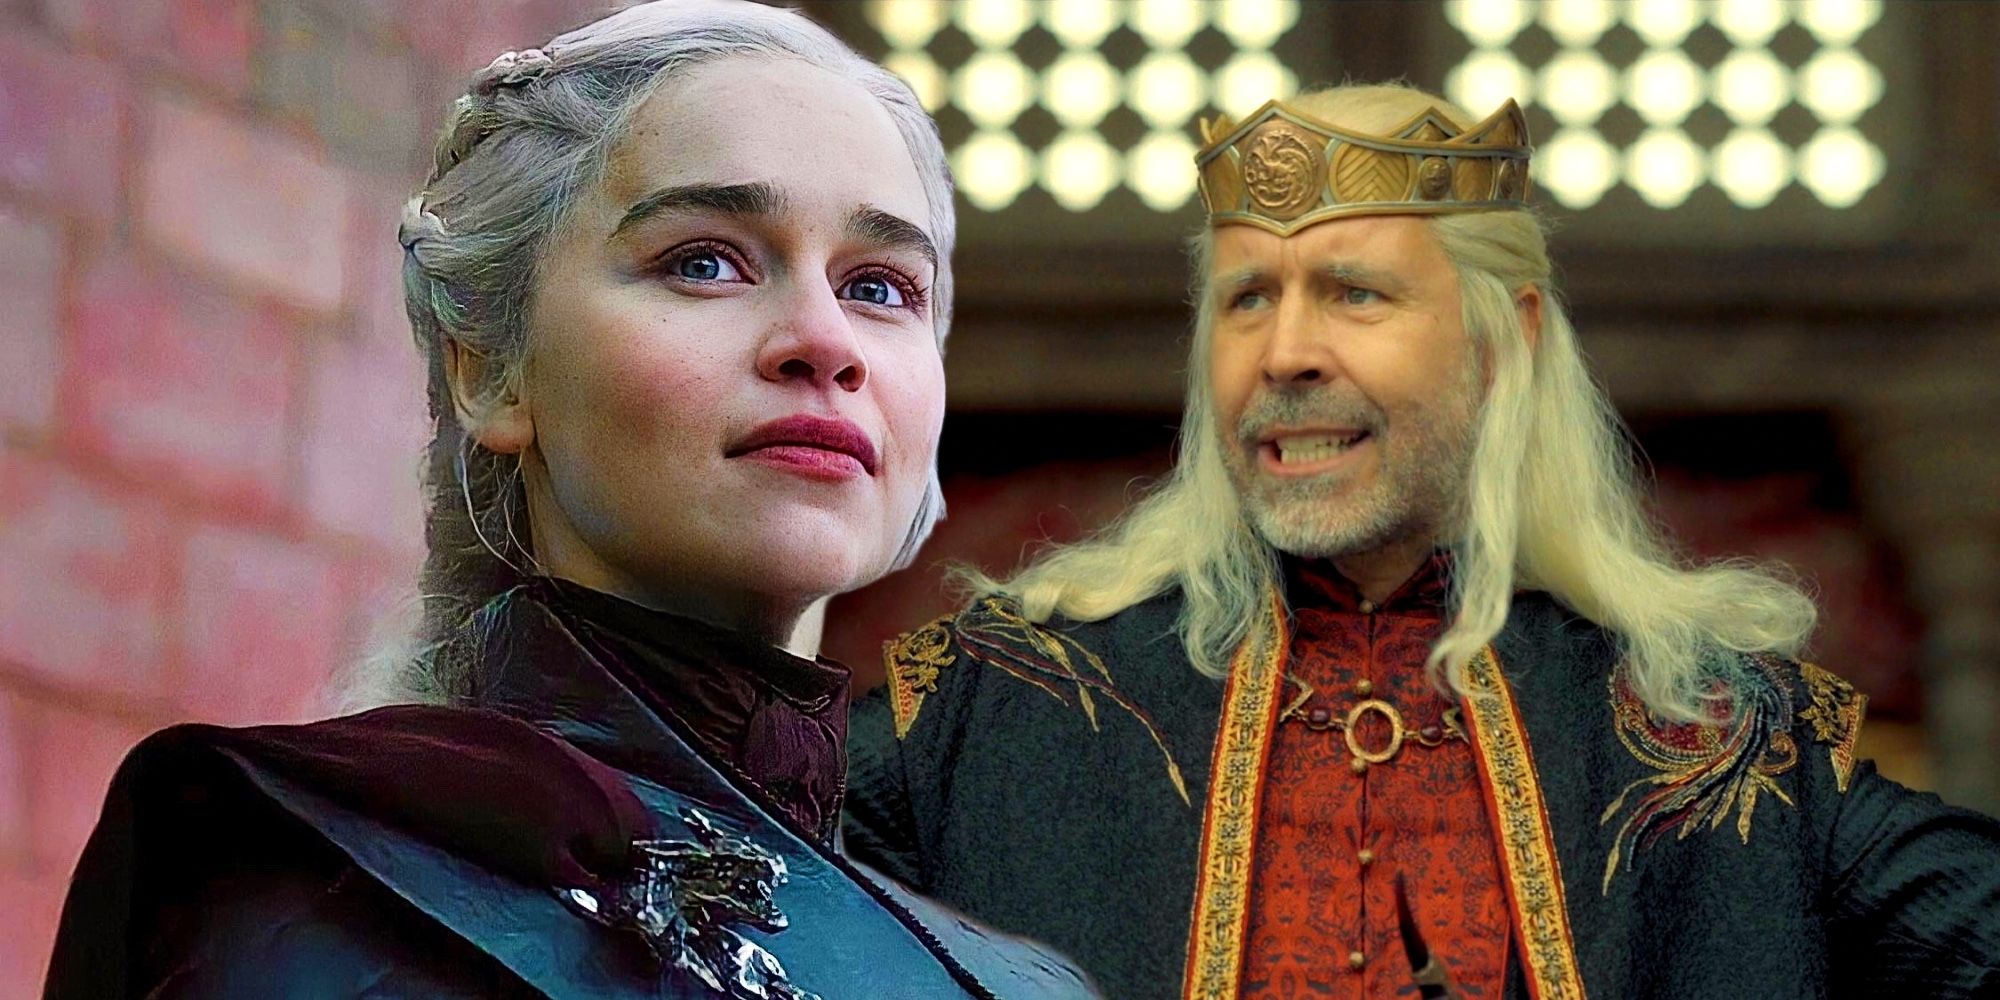 When Does House Of The Dragon Take Place In The Game Of Thrones Timeline?